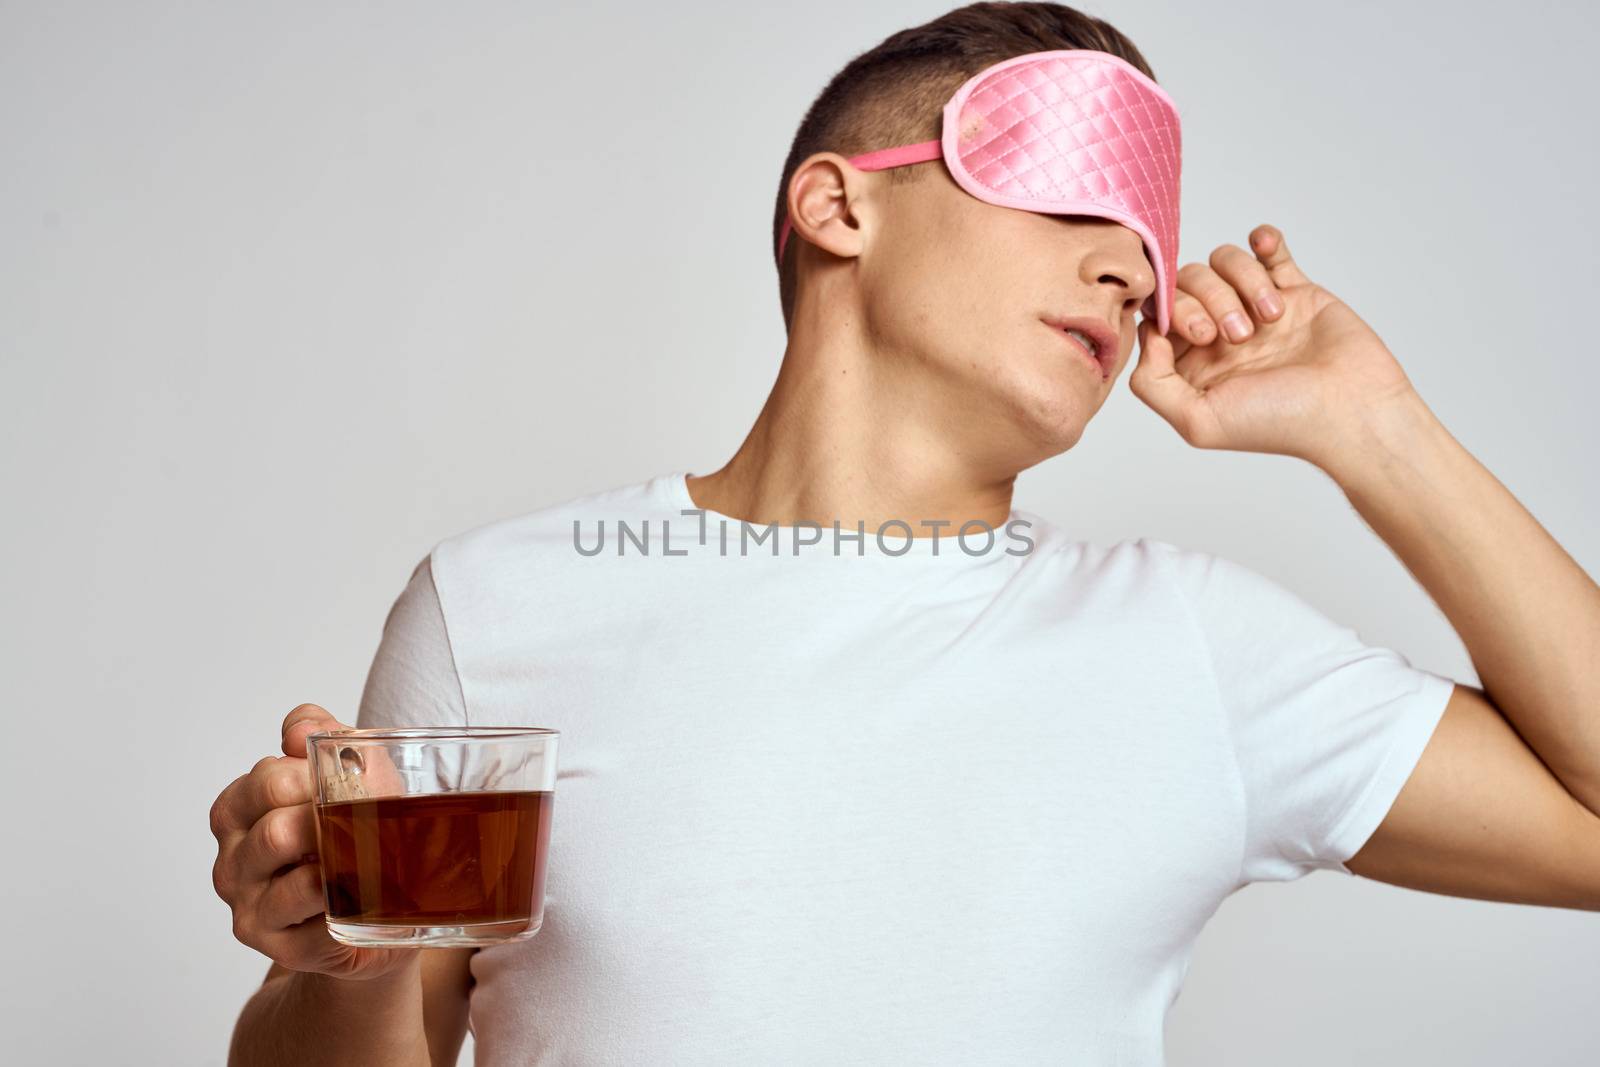 handsome man with pink sleep mask and with a cup of tea in hand pulls himself up on a light background cropped view model. High quality photo